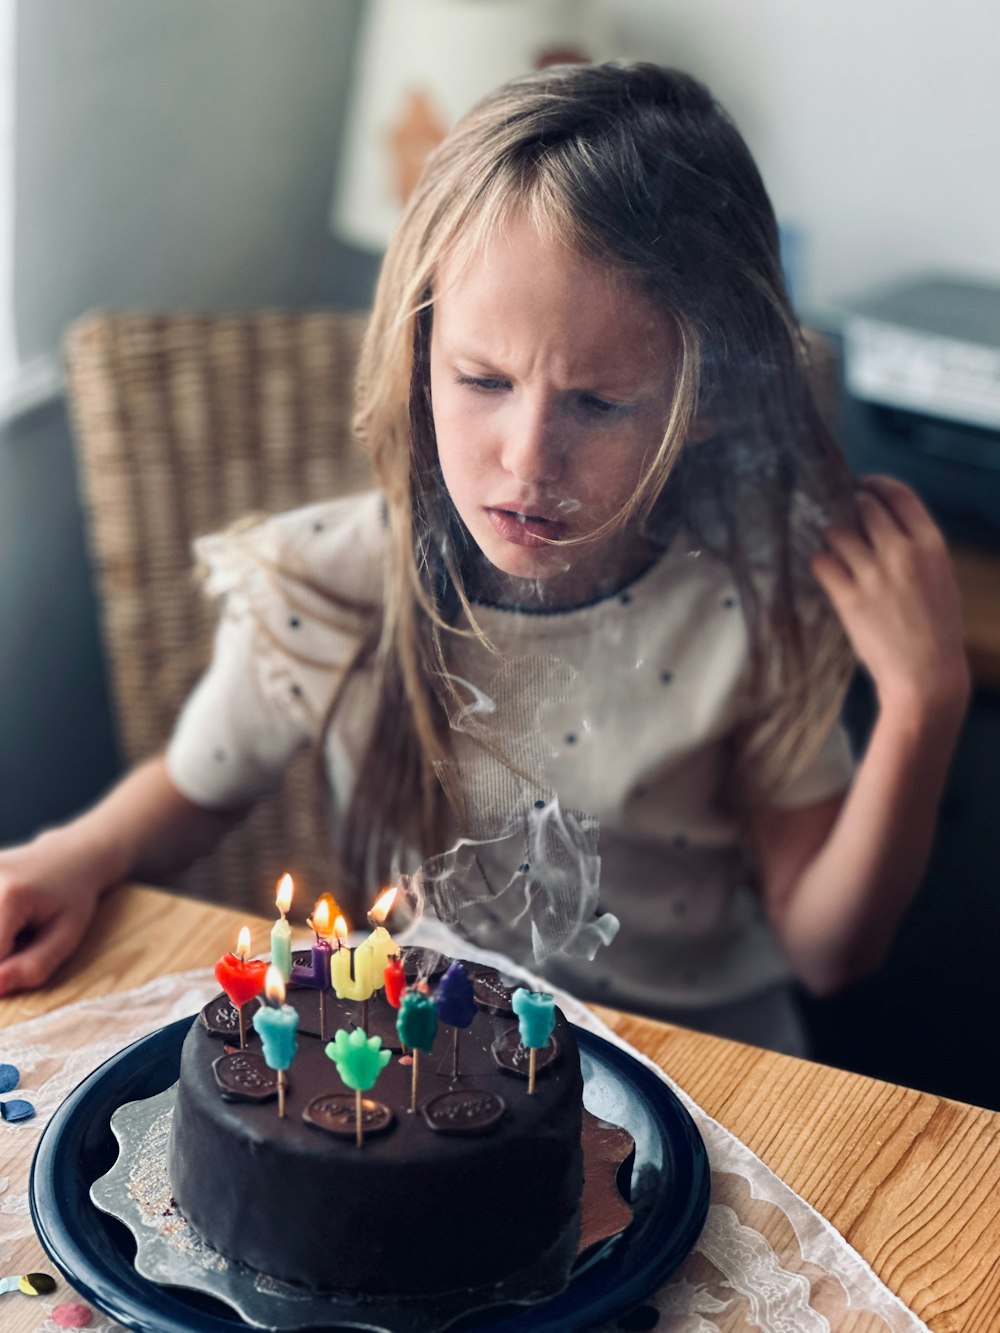 a young girl blowing out candles on a chocolate cake